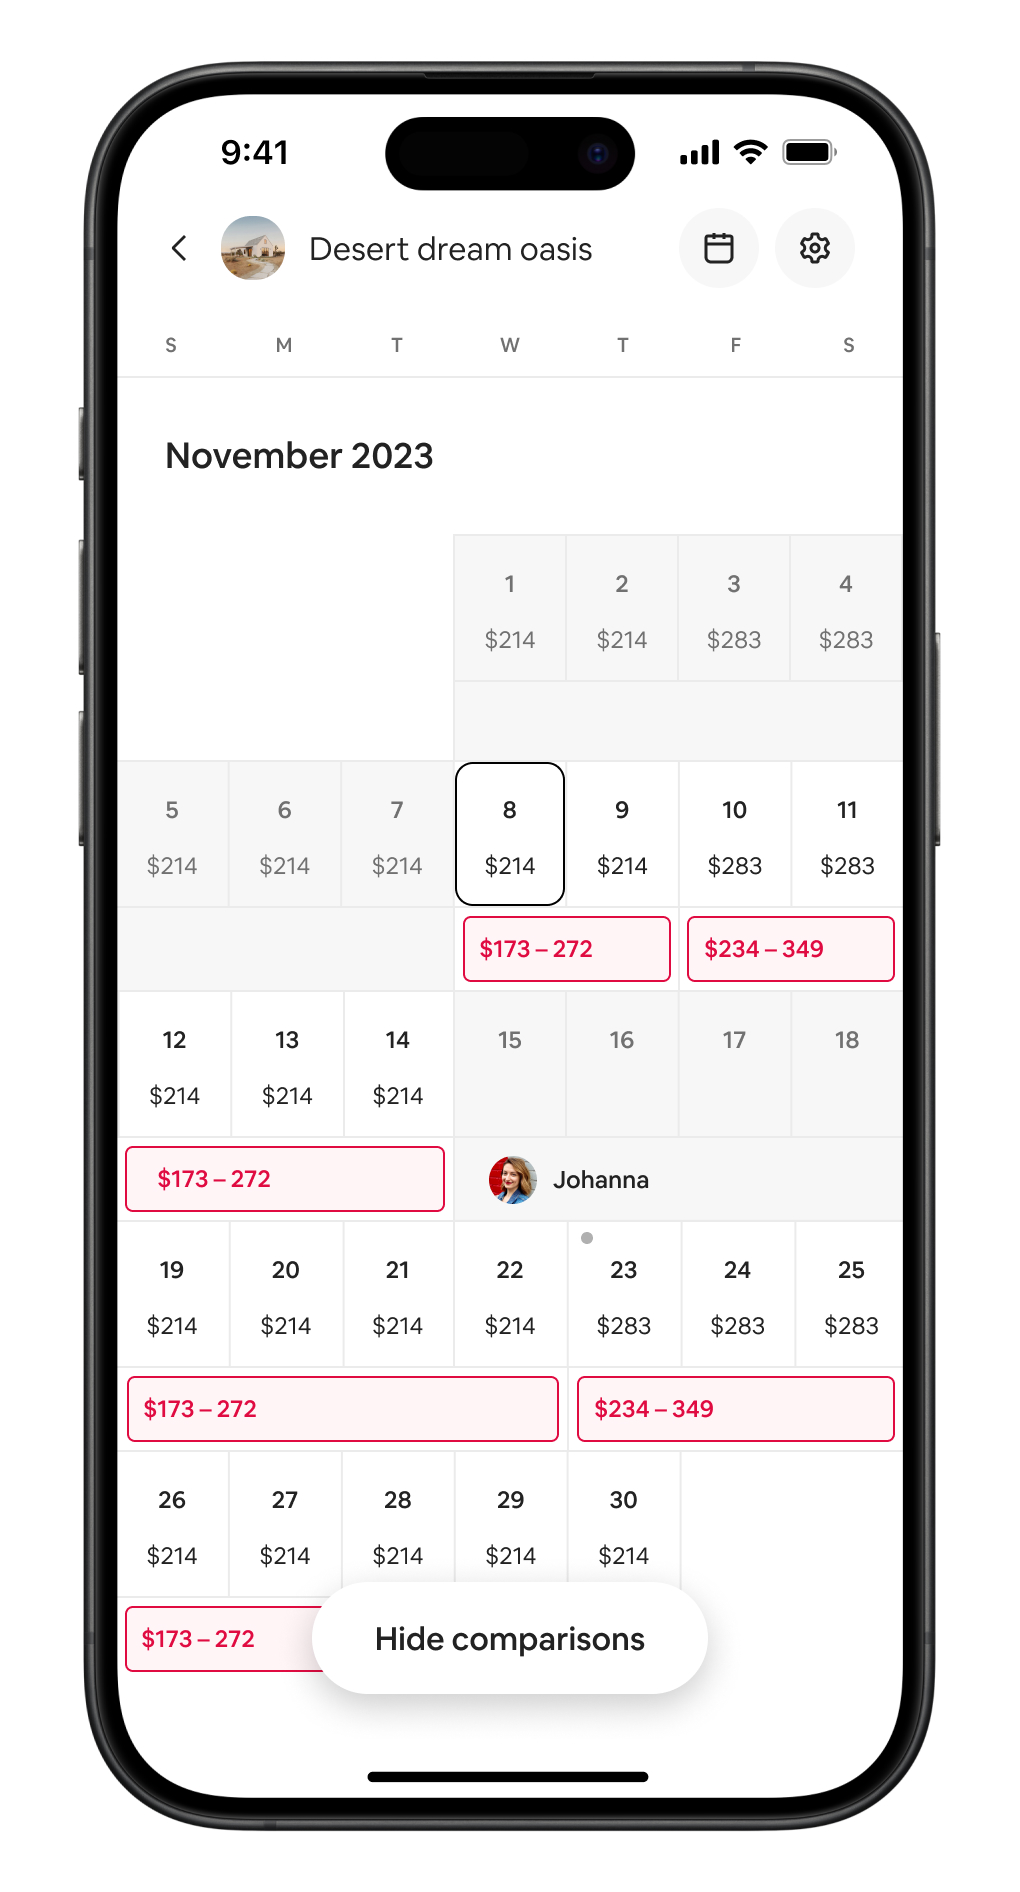 Phone screen with calendar view open which includes a view of Host pricing.